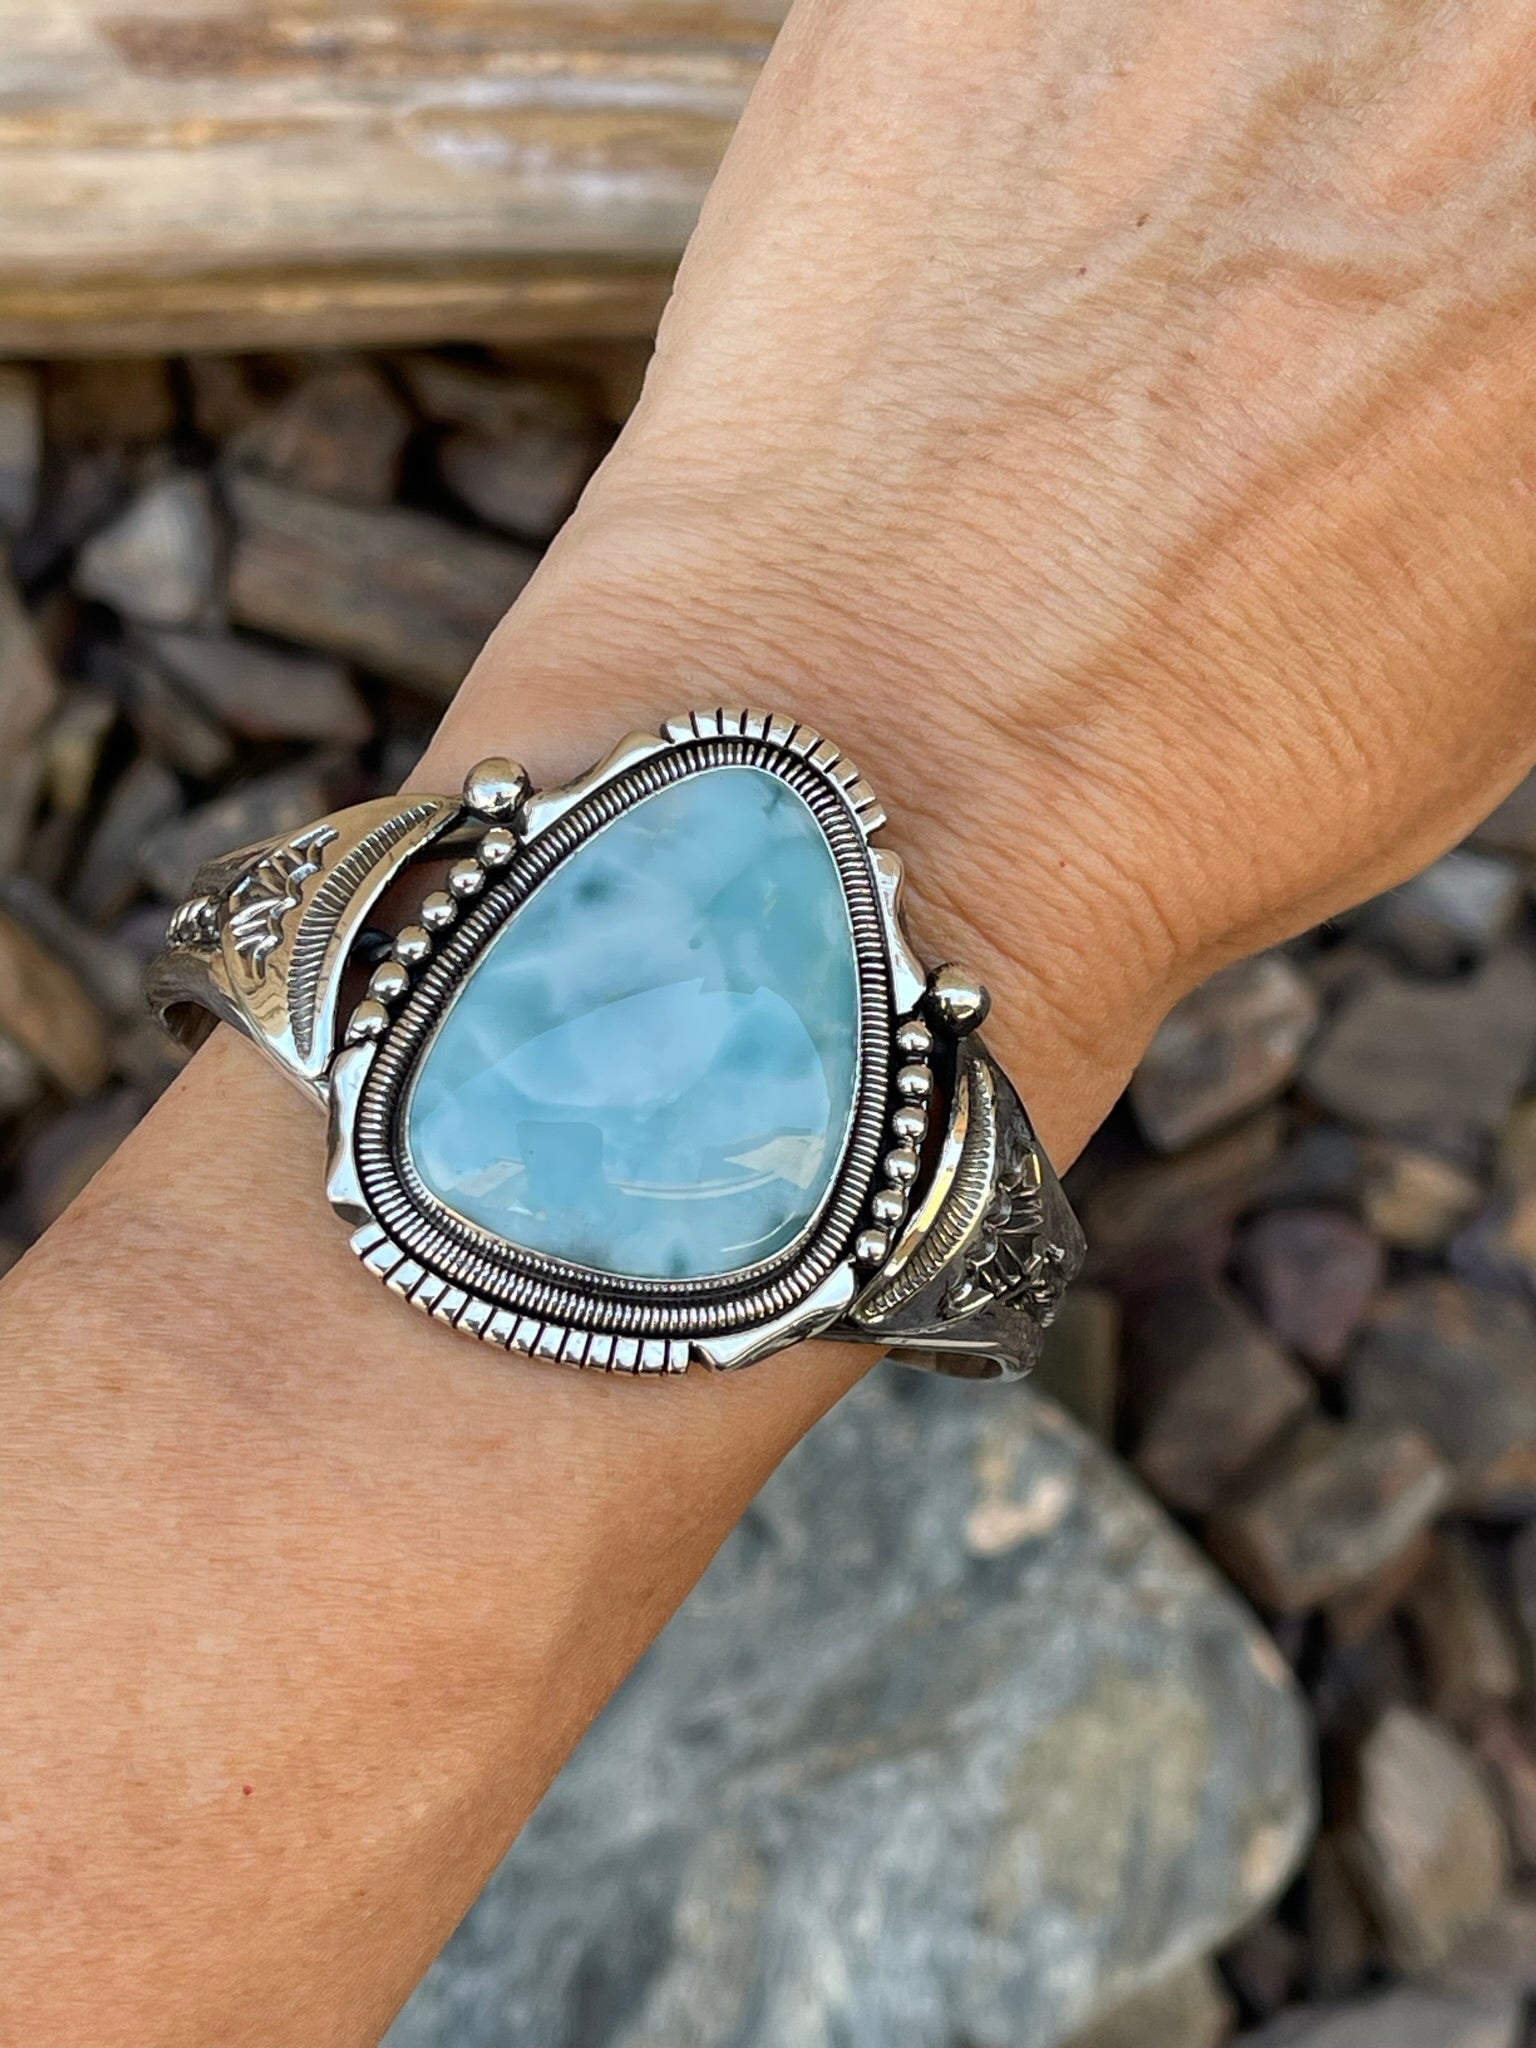 Handmade Solid Sterling Silver Larimar Bracelet with Coil and Bead Detail